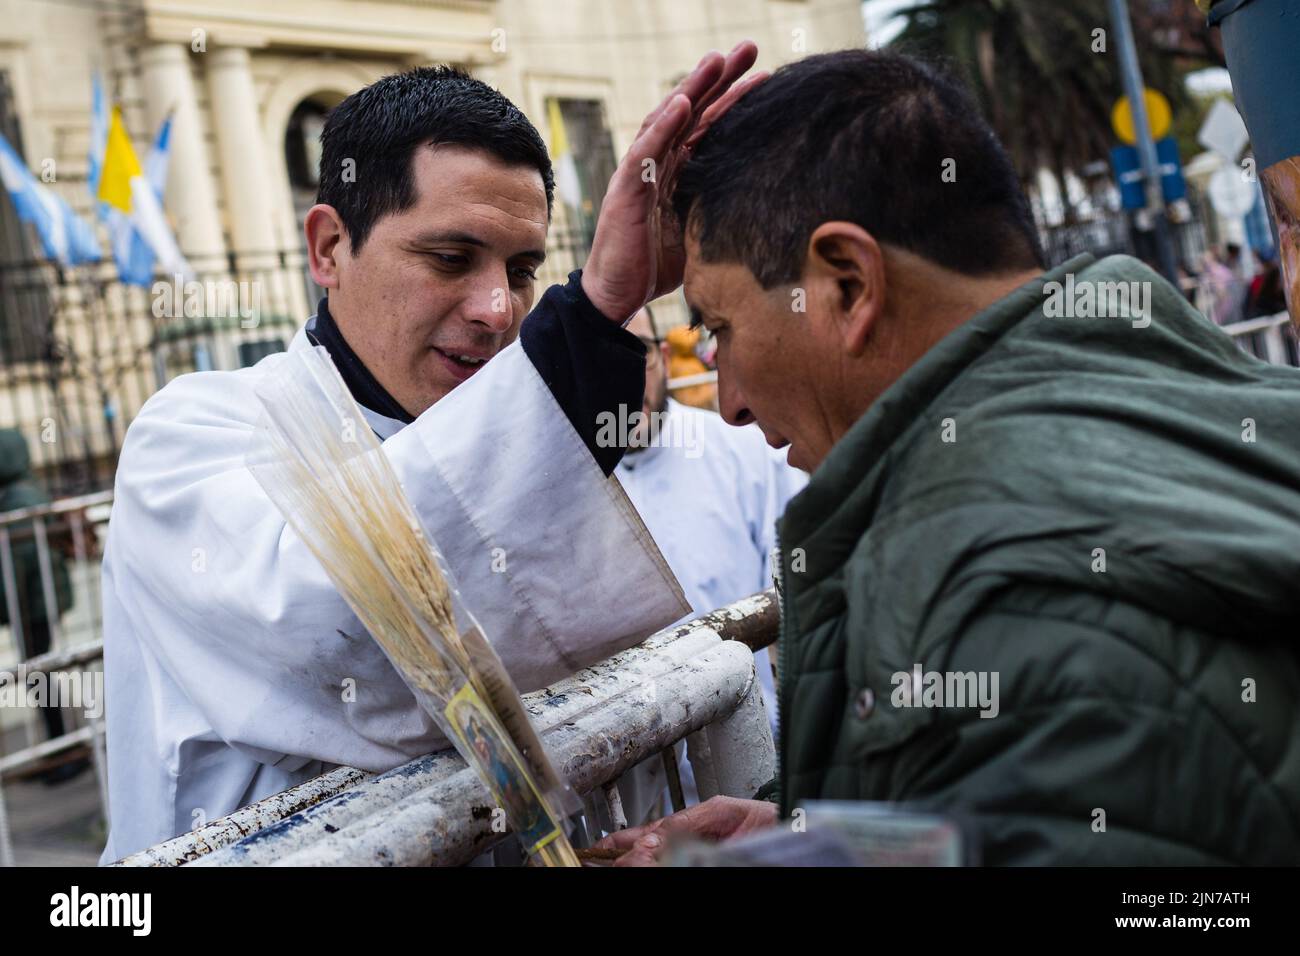 A priest blesses a devotee meters from the temple built in honor of the Saint of Labor. After two years of pandemic, the great feast of San Cayetano was celebrated again in the church Santuario San Cayetano, in the cosmopolitan neighborhood Liniers of the city of Buenos Aires. As every August 7, many faithful could touch the image and venerate the Saint of Labor to ask for bread, peace and sustenance. (Photo by Nacho Boullosa / SOPA Images/Sipa USA) Stock Photo